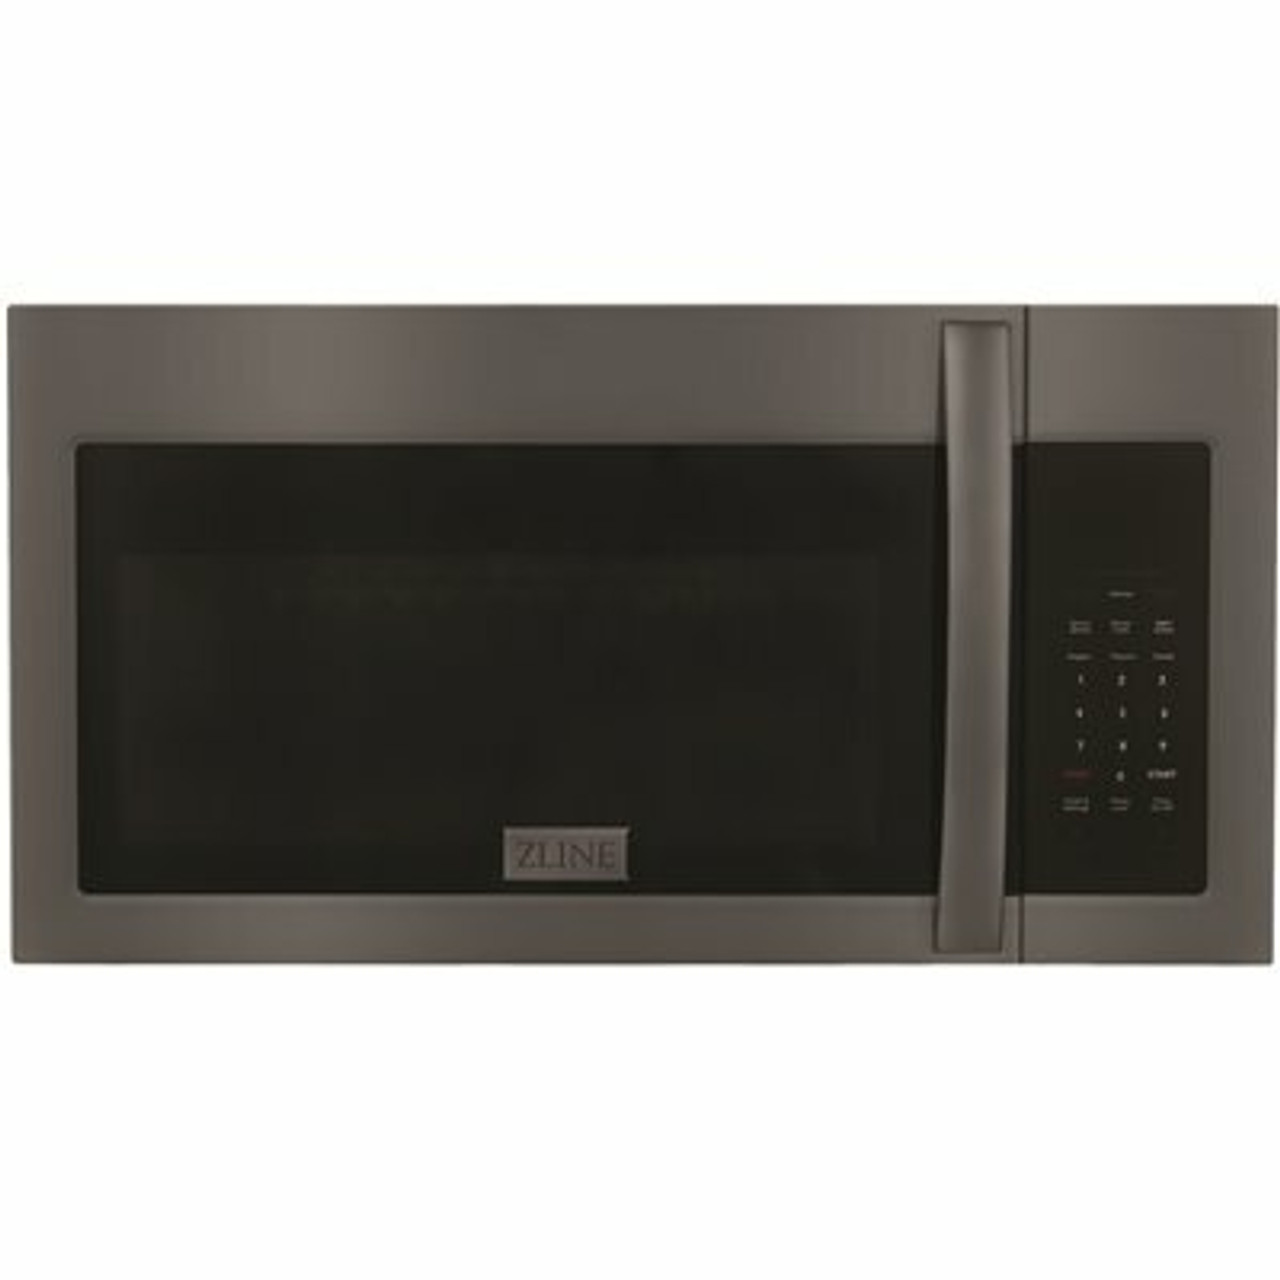 1.5 Cu. Ft. Over The Range Convection Microwave Oven In Black Stainless Steel With Modern Handle With Sensor Cooking